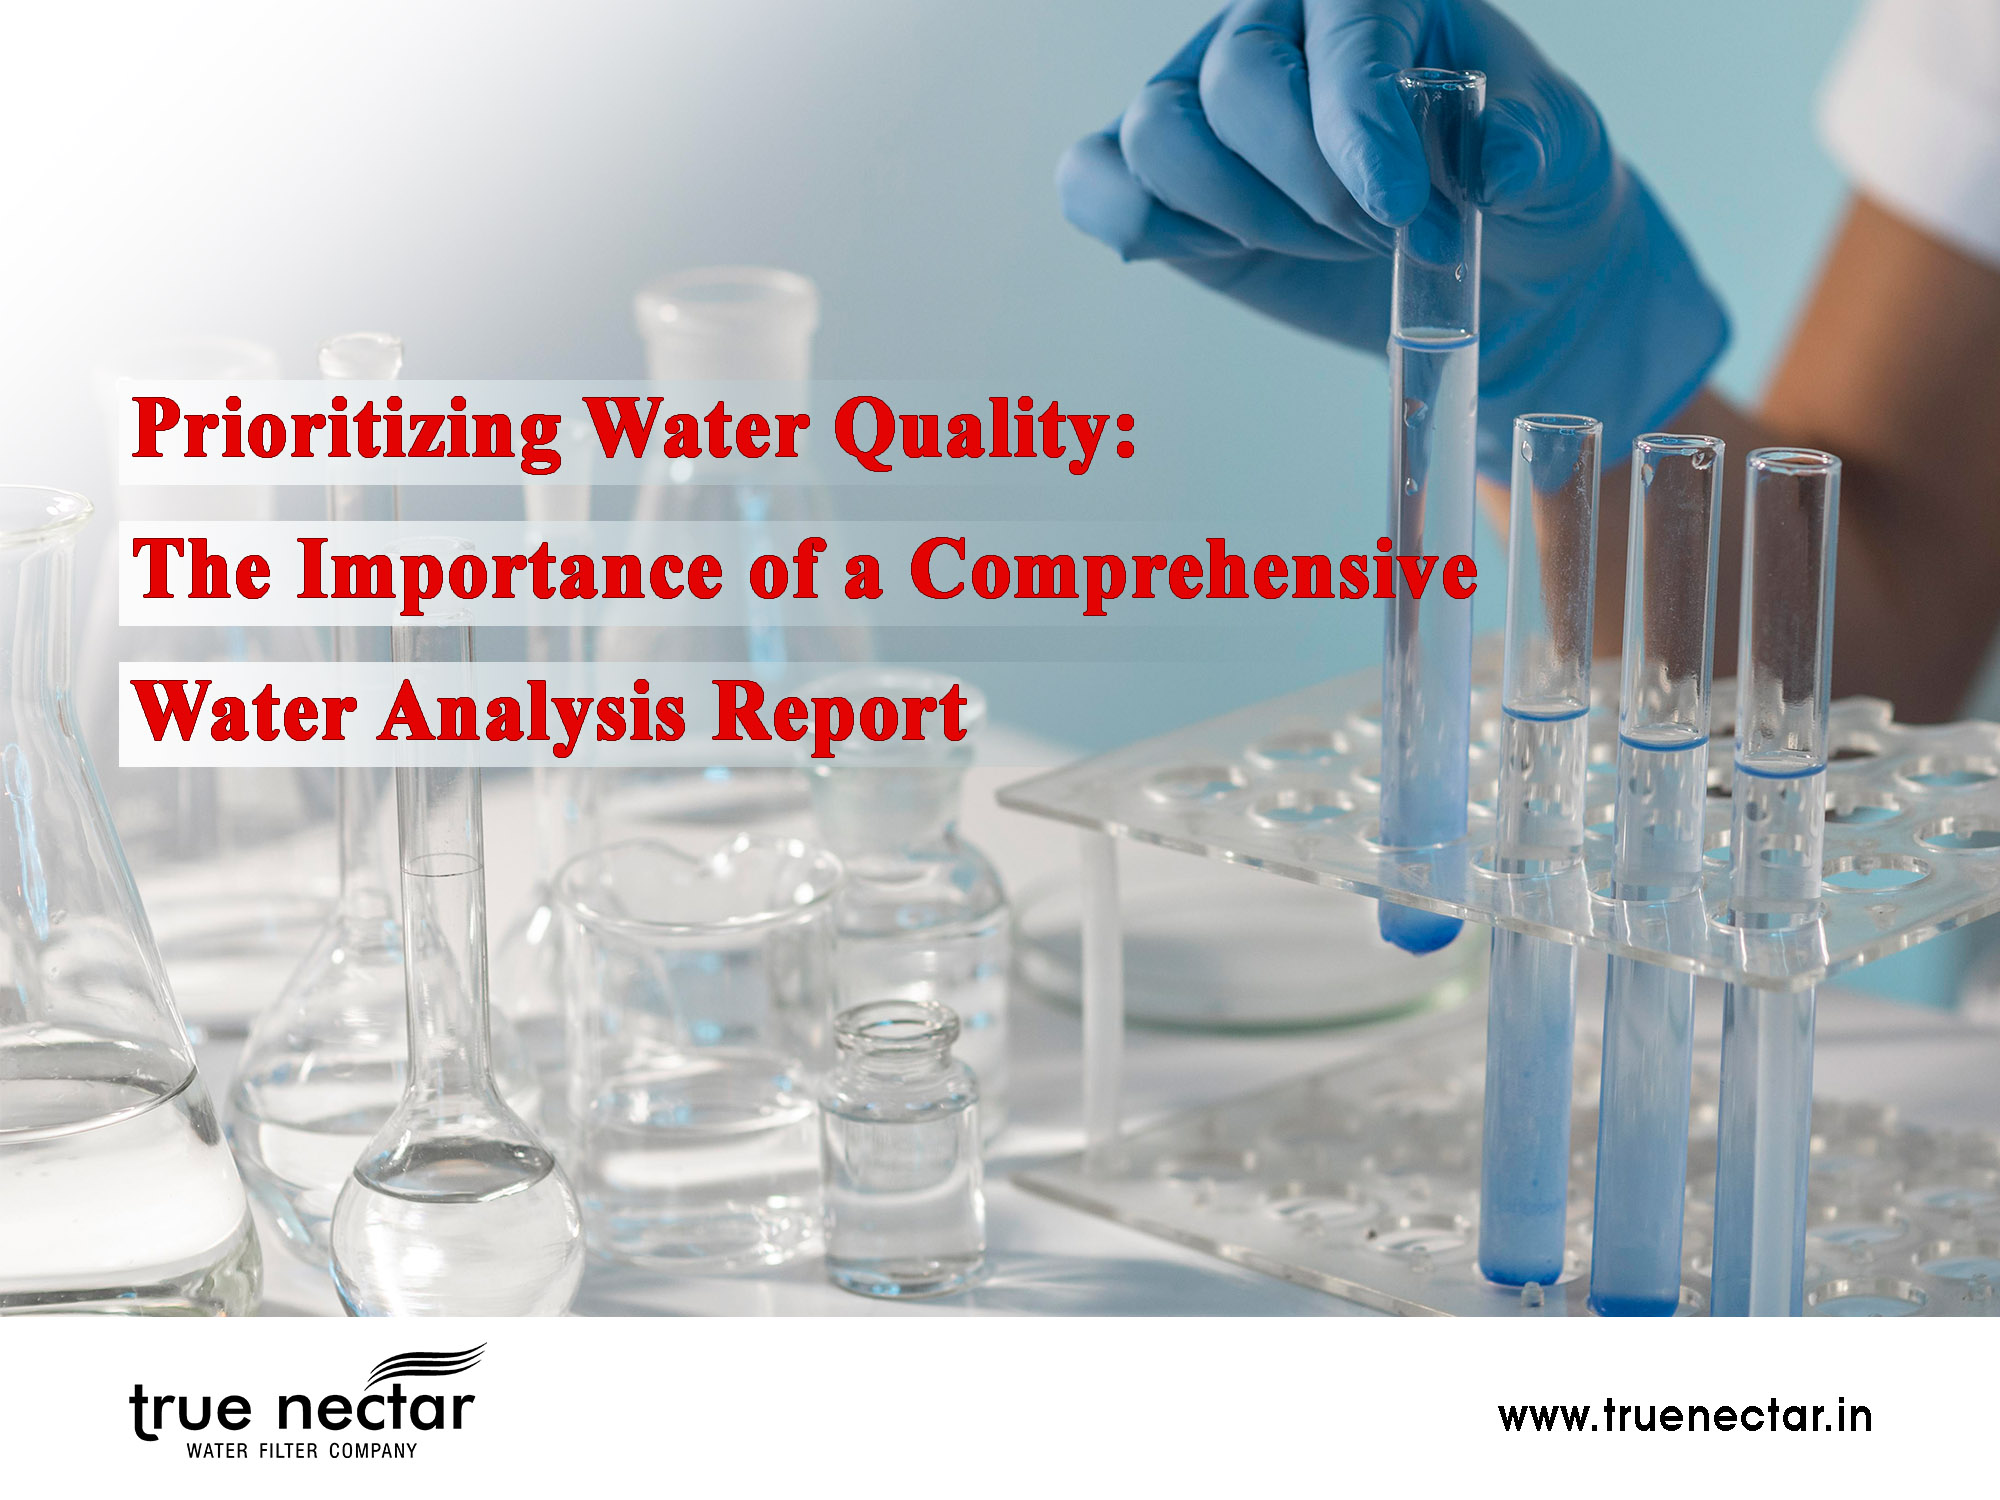 Prioritizing Water Quality: The Importance of a Comprehensive Water Analysis Report